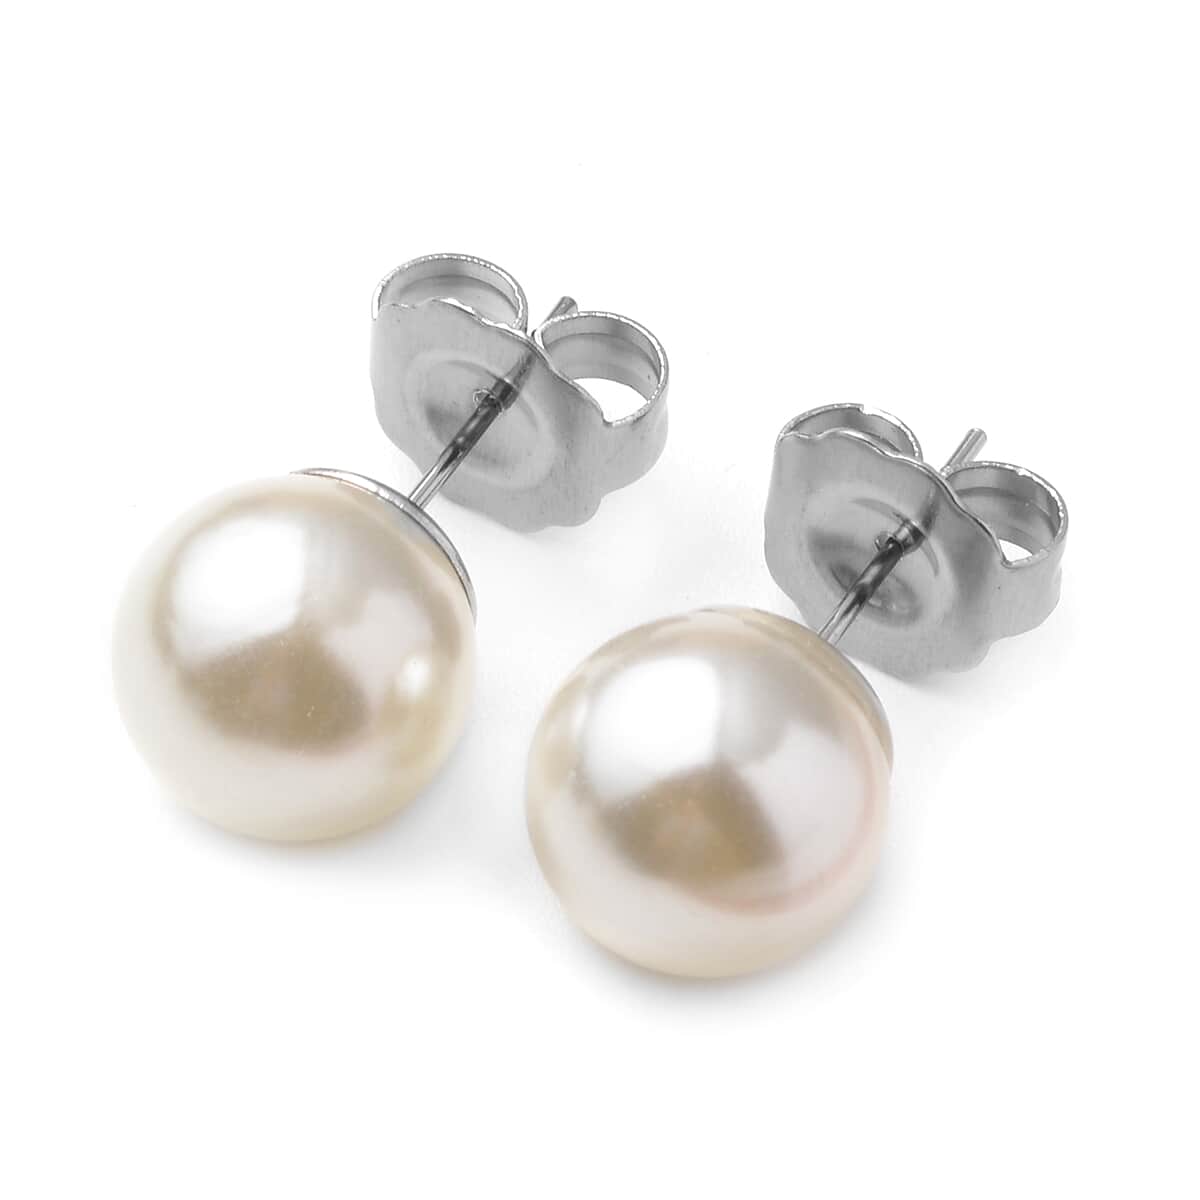 Set of 2 Simulated White Pearl Necklace 20-22 Inches and Earrings in Silvertone and Stainless Steel image number 5